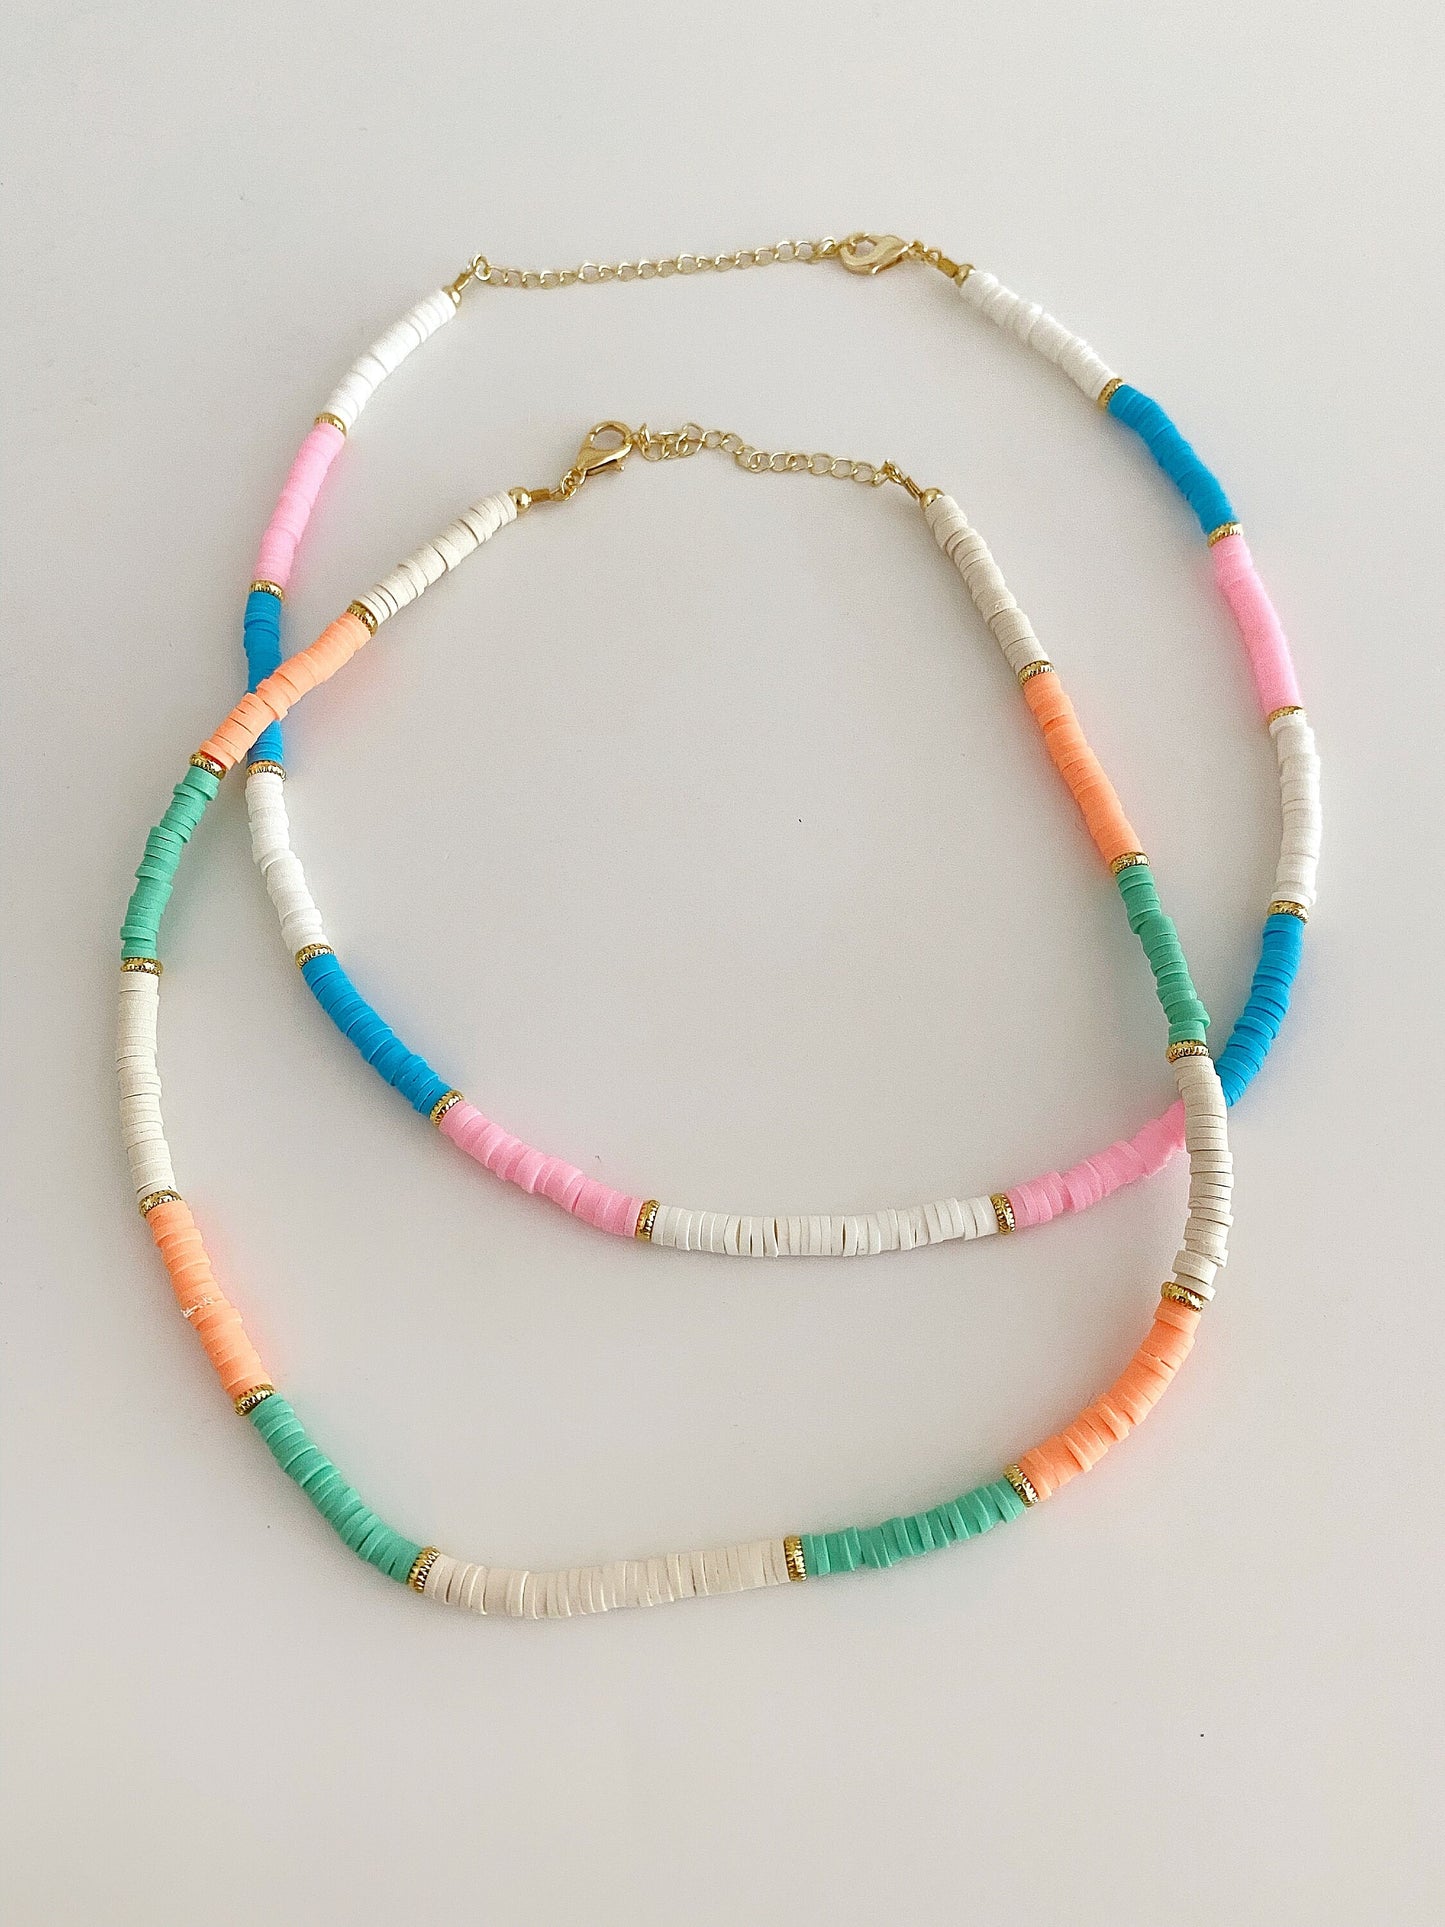 Colorful Bead Adjustable Beach Clay Necklace • Choker Tropical Heishi